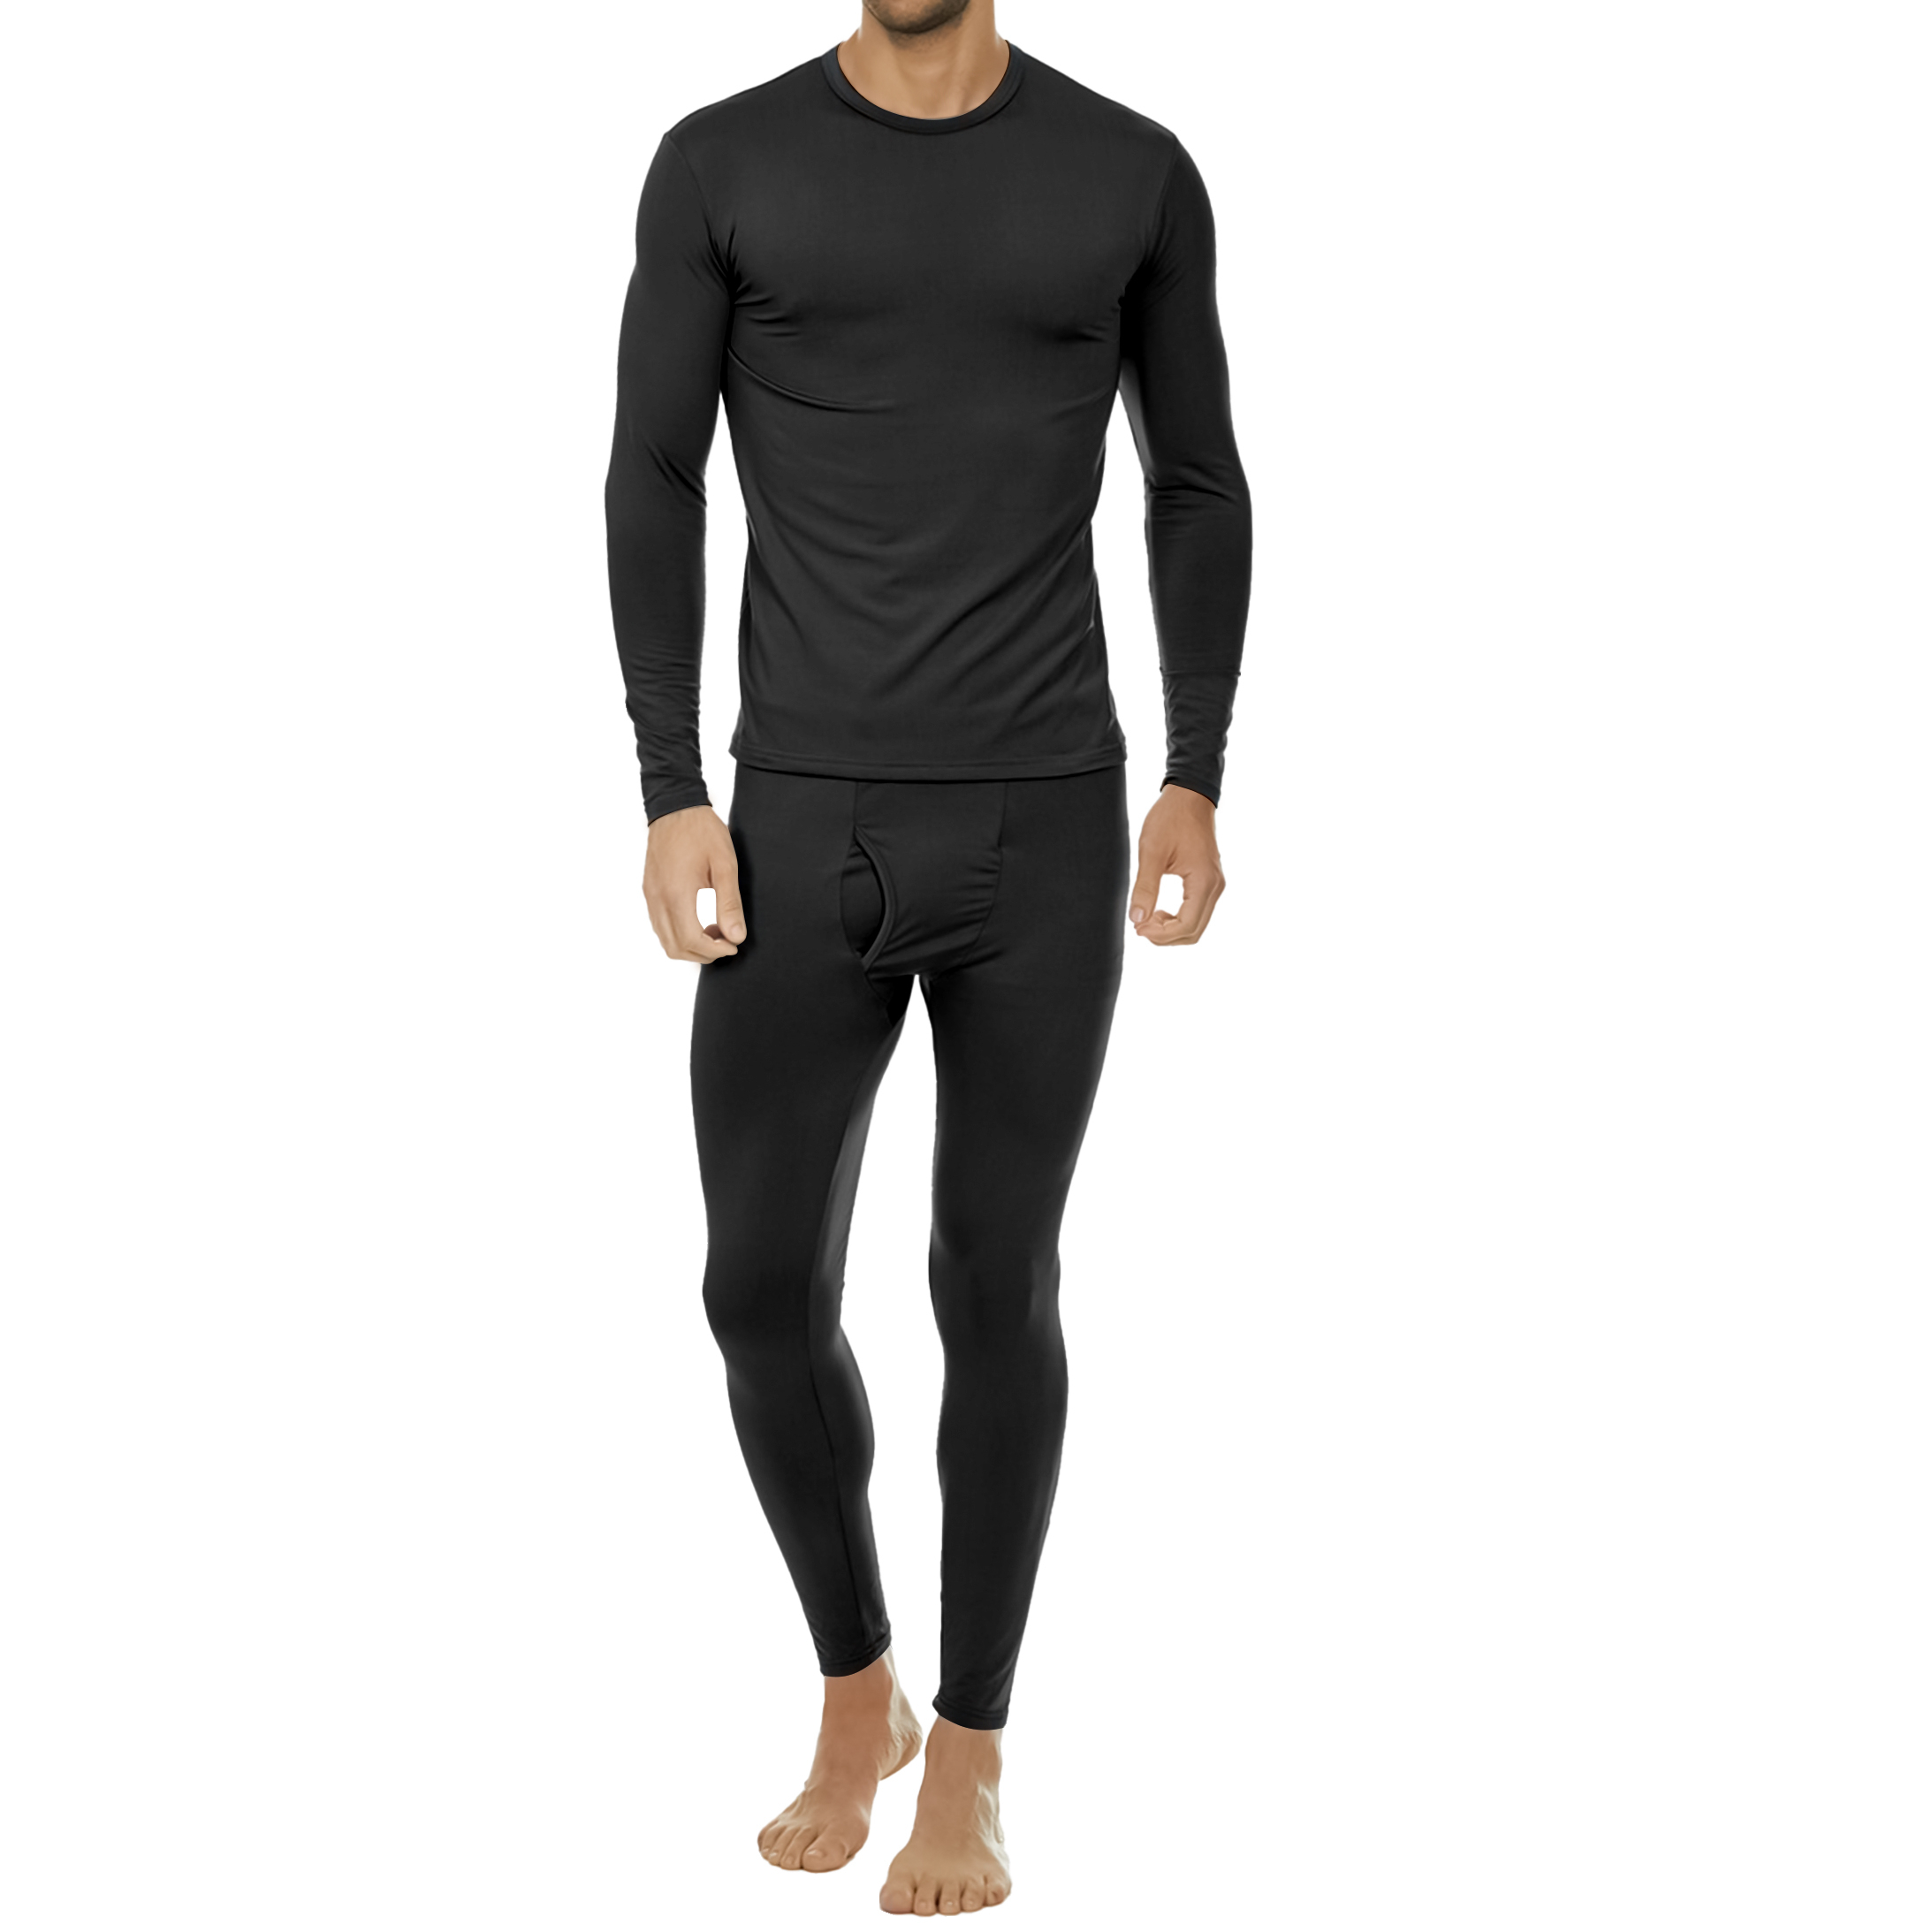 Men's Fleece Lined Thermal Underwear Set For Cold Weather - M